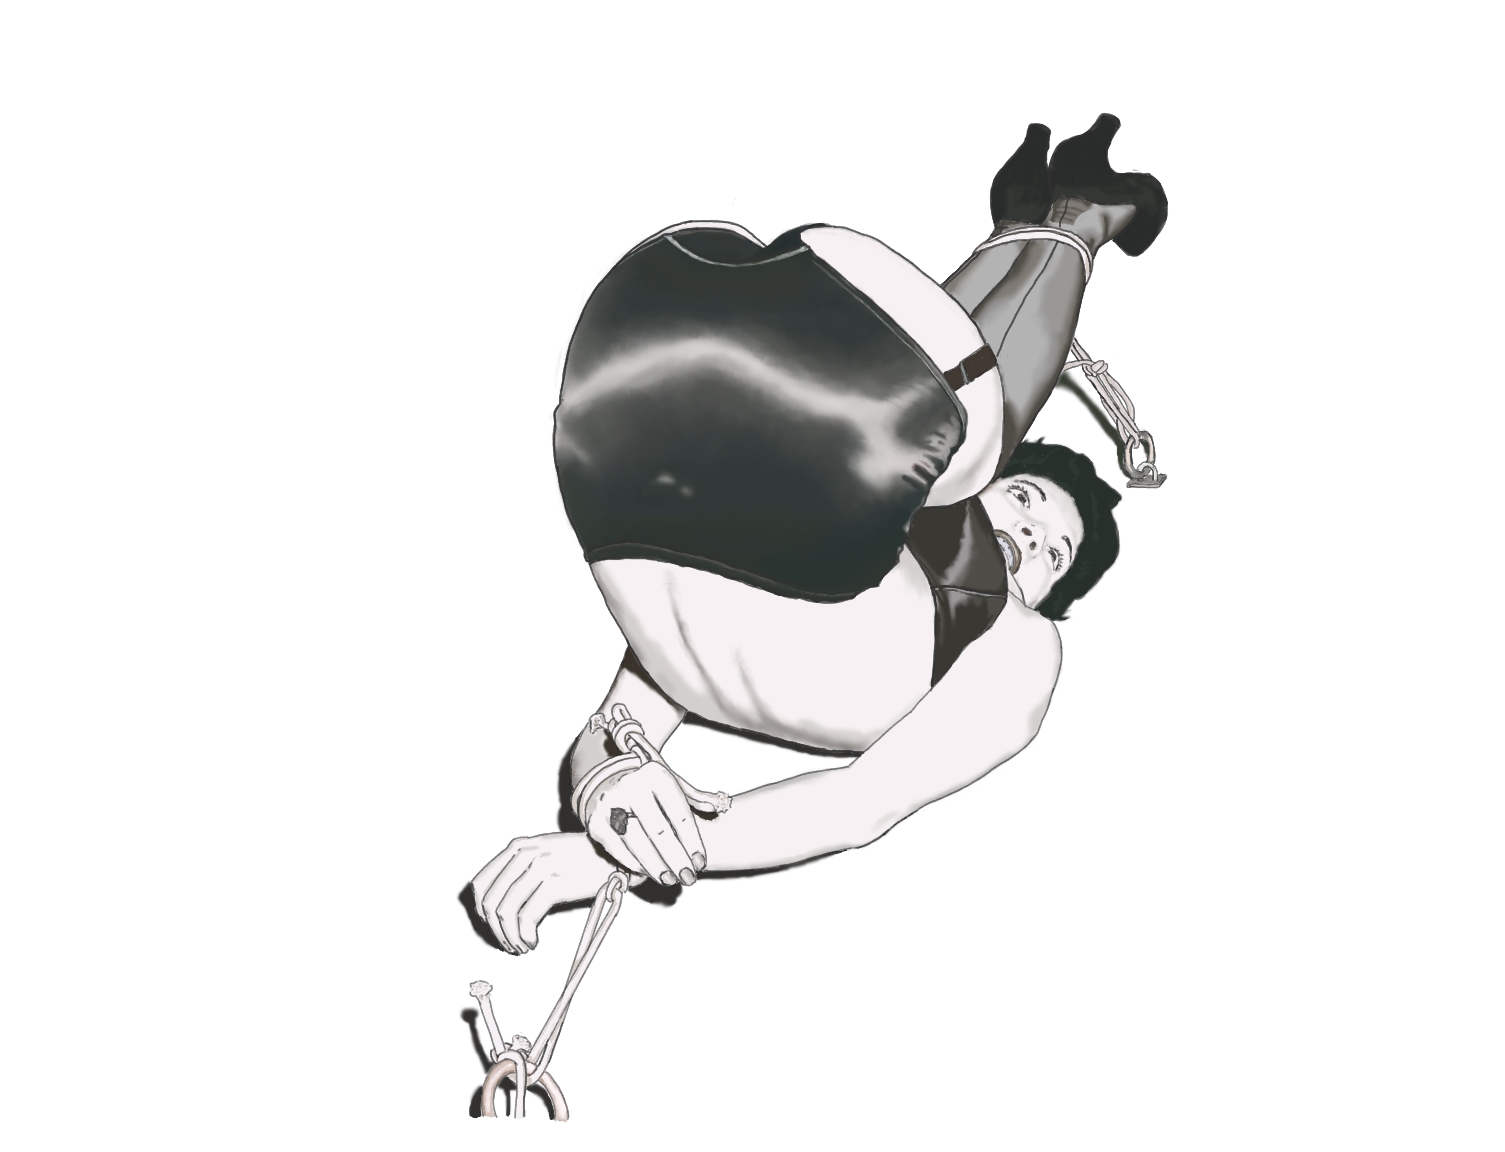 A detailed sketch of an Irving Klaw bondage photograph. A woman in black panties is bound in a compromising position with her butt in the air.